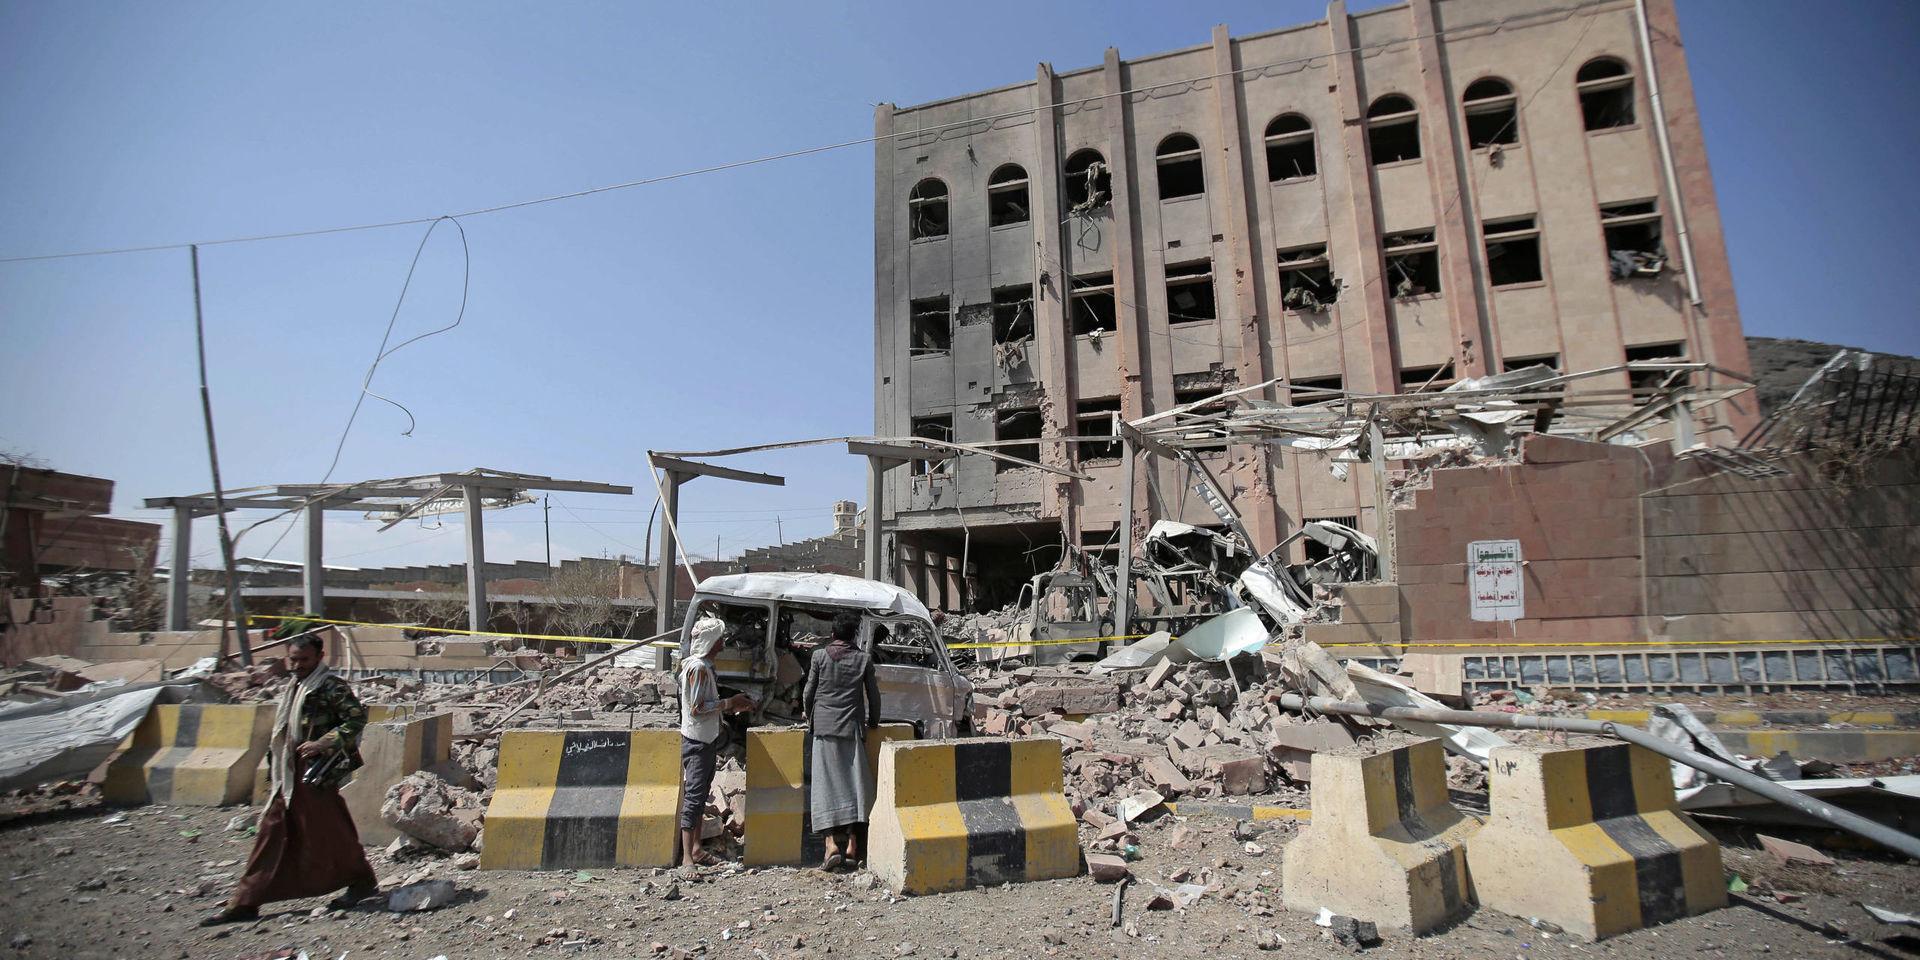 People inspect rubble after a Saudi-led coalition airstrike in Sanaa, Yemen, Sunday, Feb. 4, 2018. Yemeni rebels say an air raid by the coalition fighting them struck a police building in the rebel-controlled capital, Sanaa, killing at least eight people. In a statement by their military media unit, the rebels, known as Houthis, say that a child was killed in the Sunday attack that badly damaged a department of records building and wounding over 50 people. (AP Photo/Hani Mohammed)